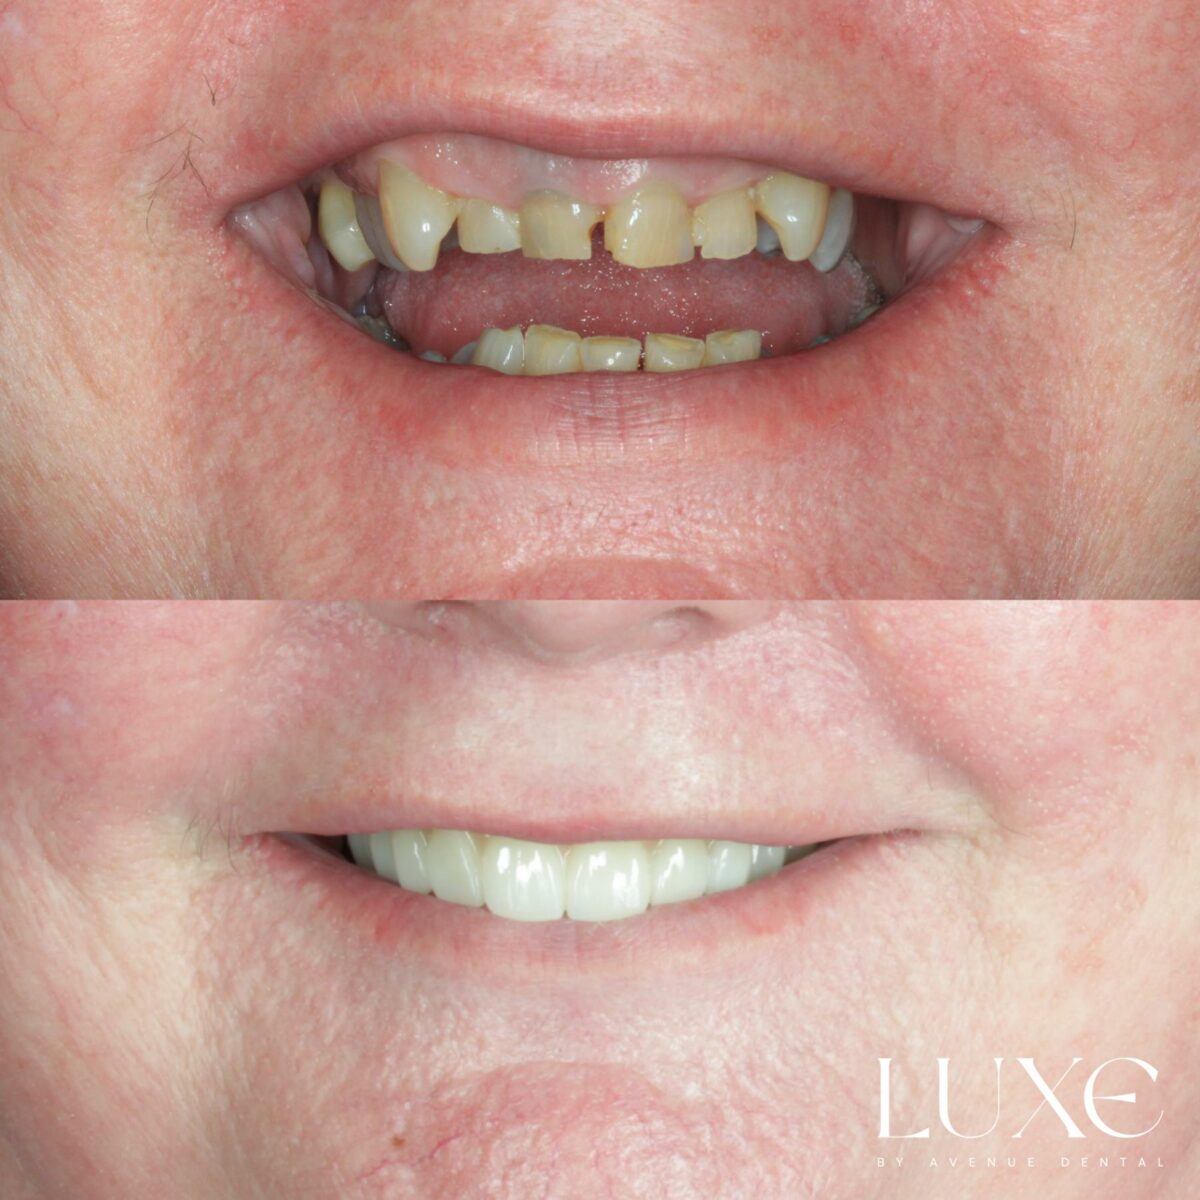 Luxe Dental Allonfour Results (2)